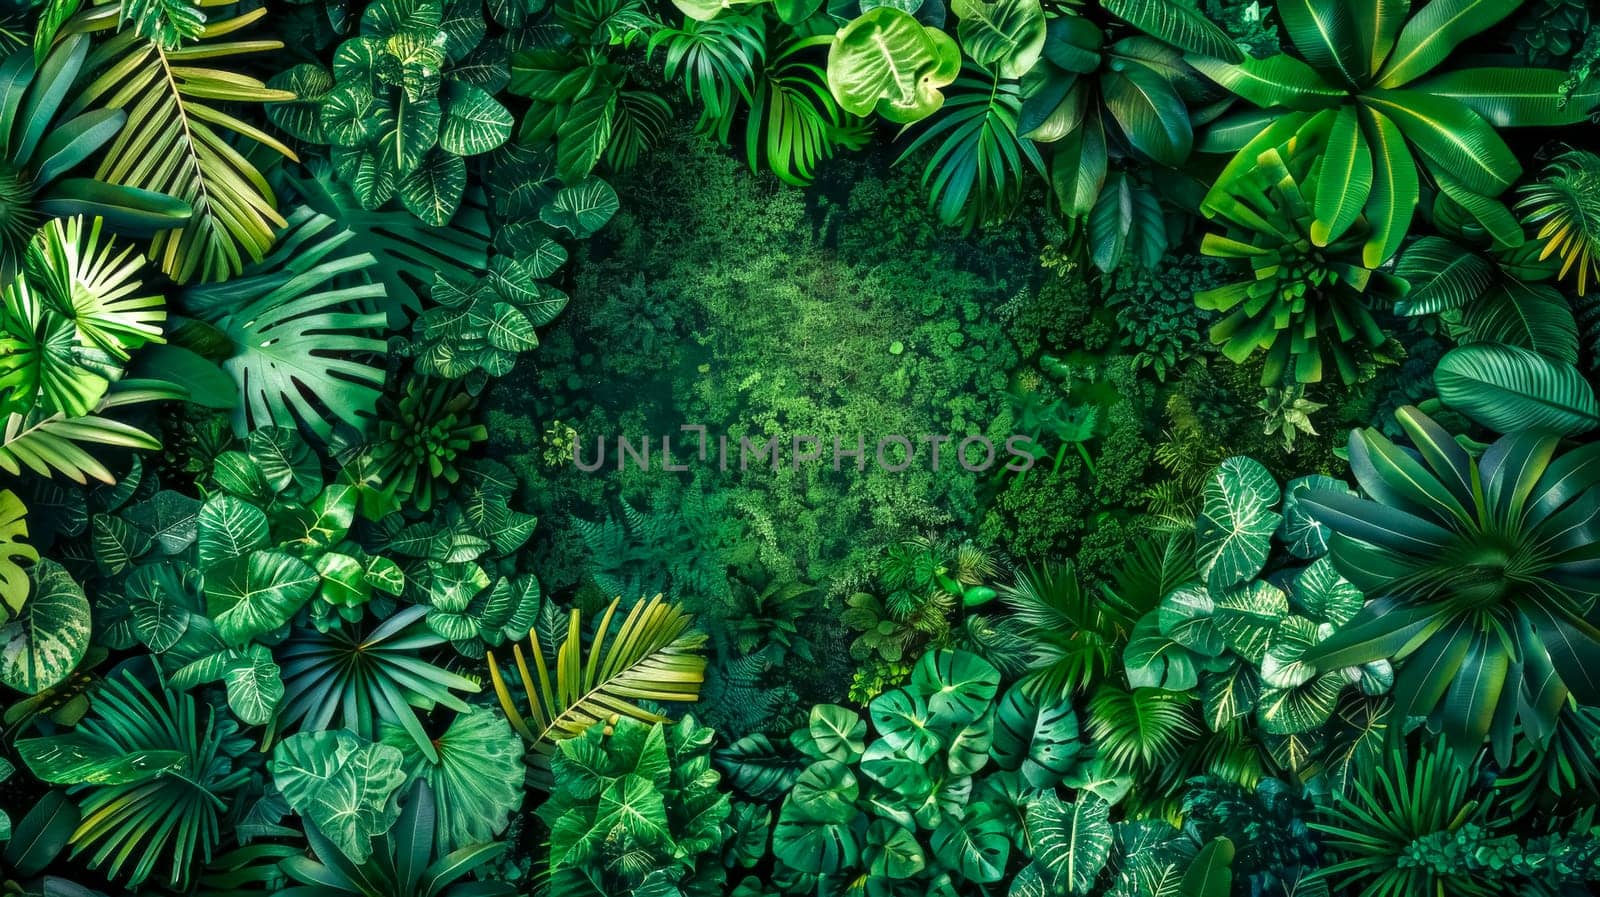 Vibrant overhead view of diverse tropical foliage forming a natural frame